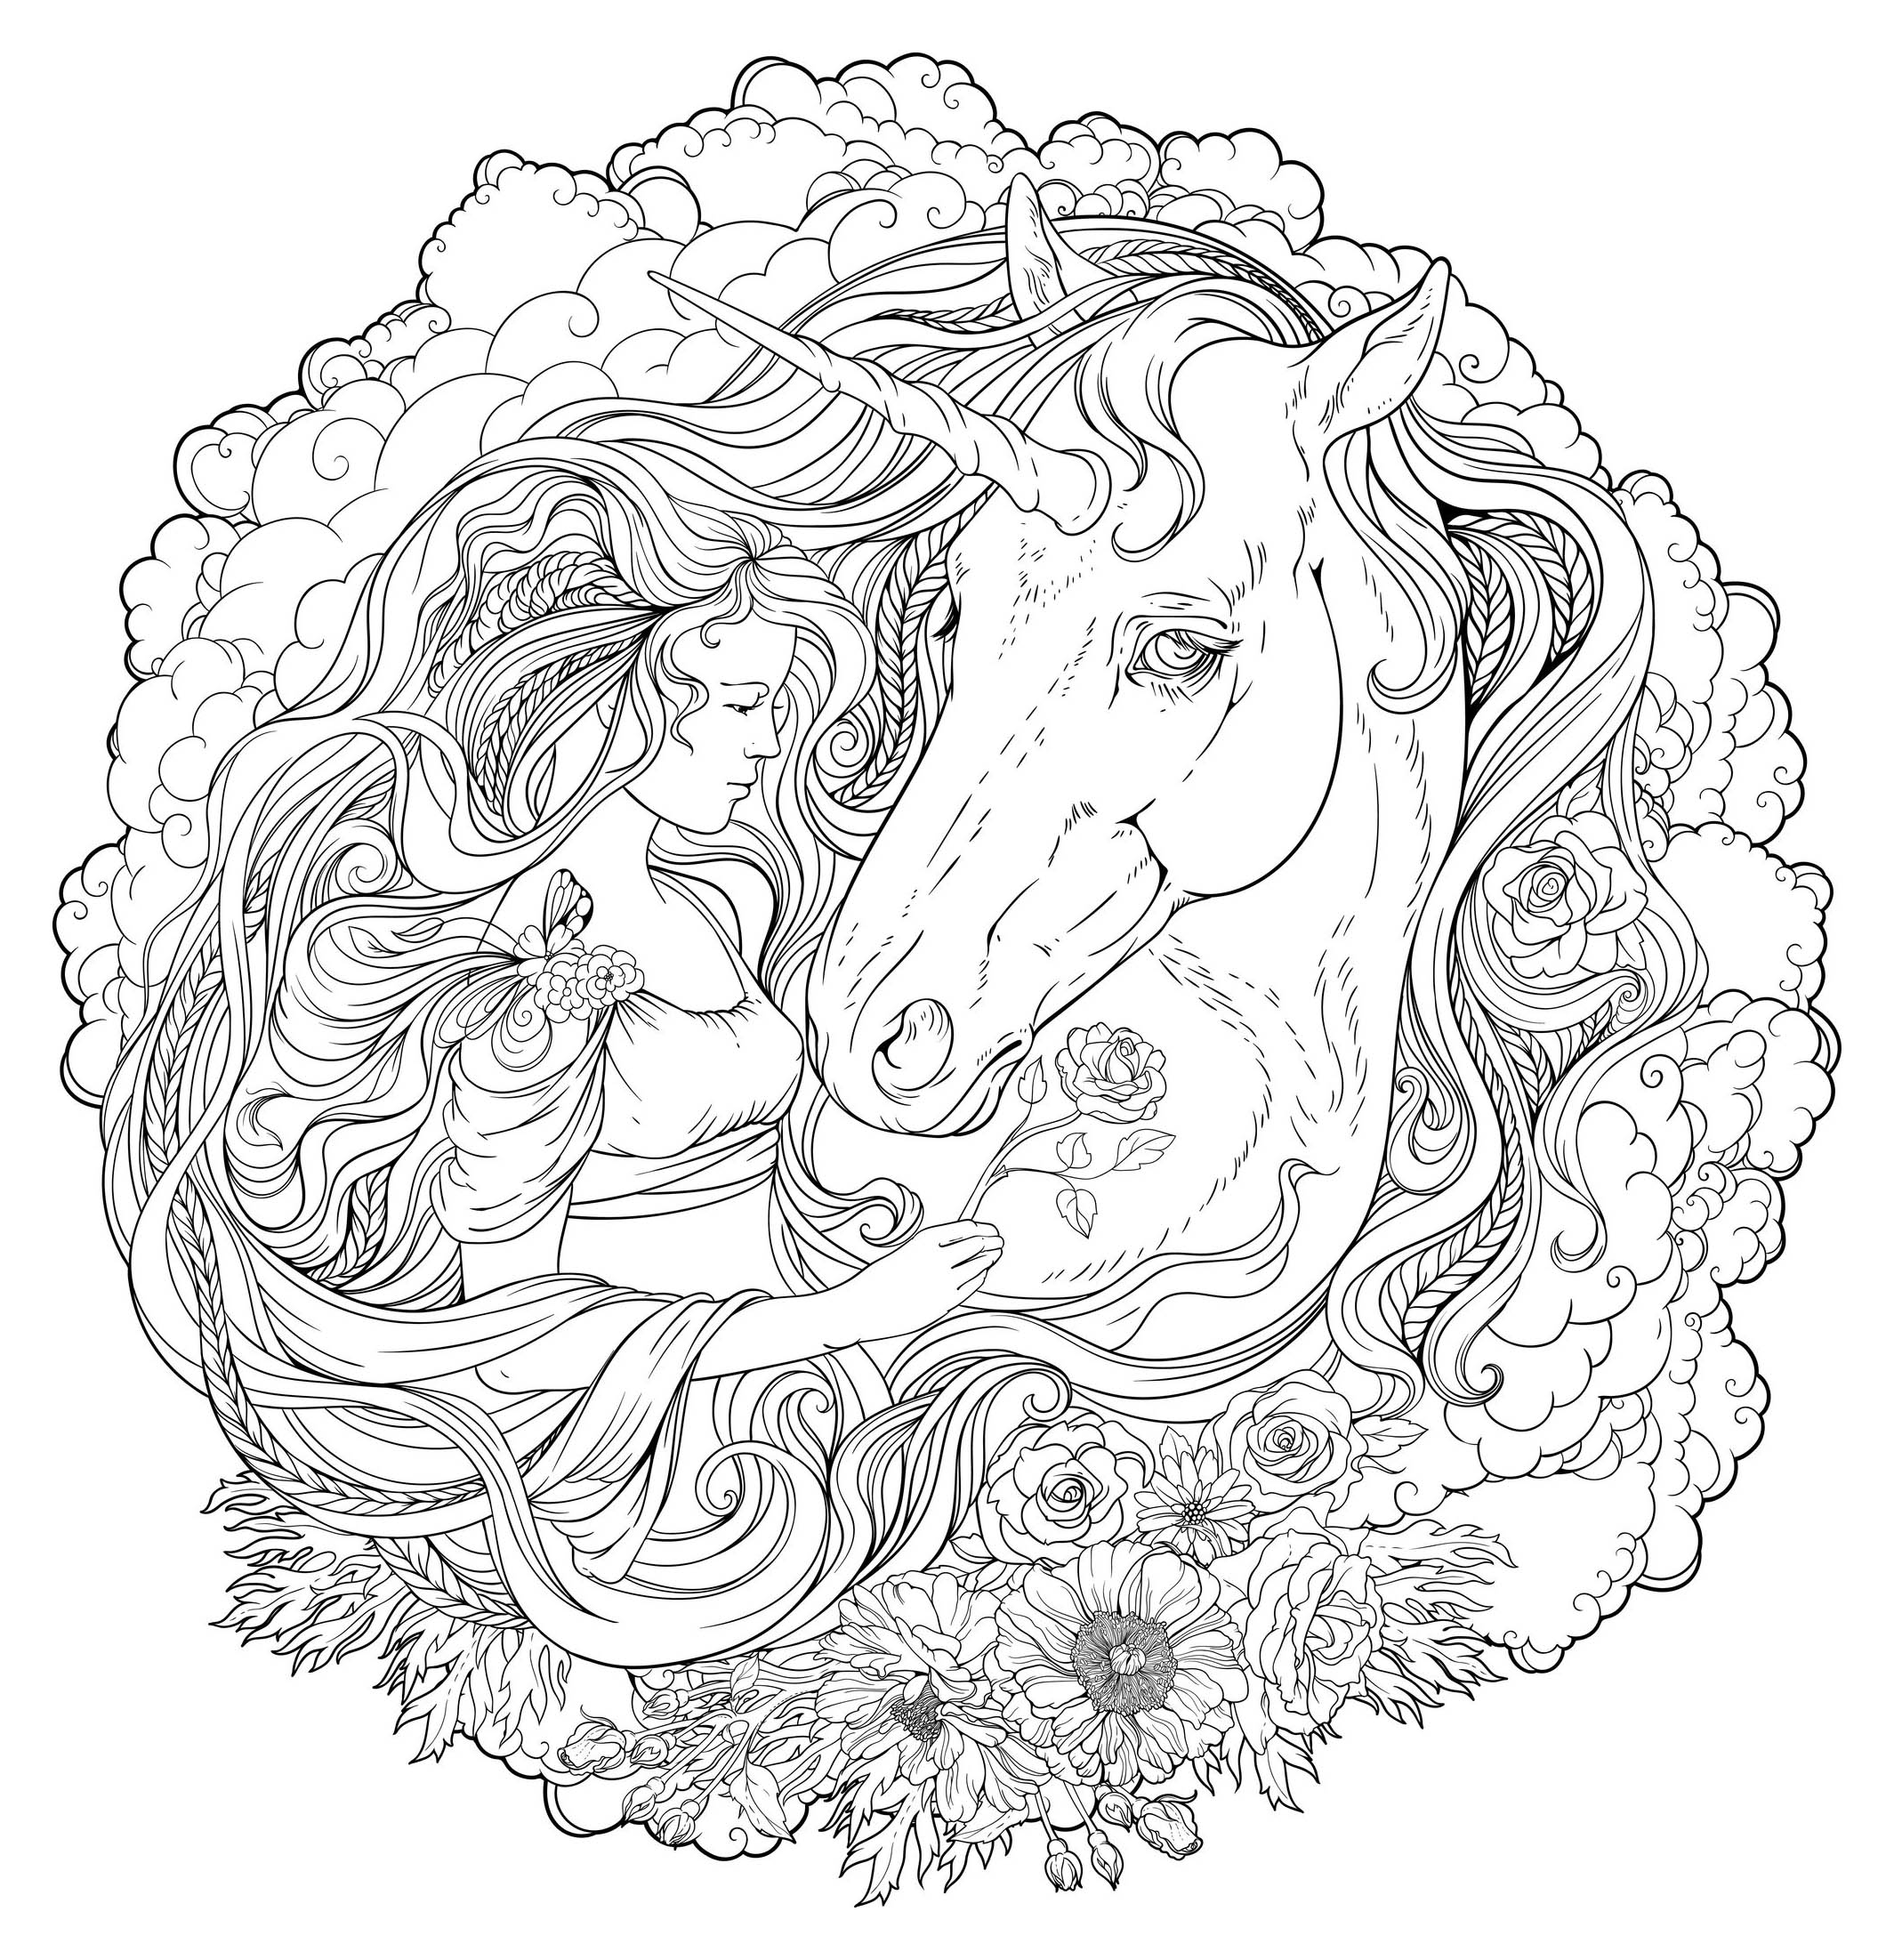 Unicorn & Girl in the clouds - Difficult Mandalas (for adults)